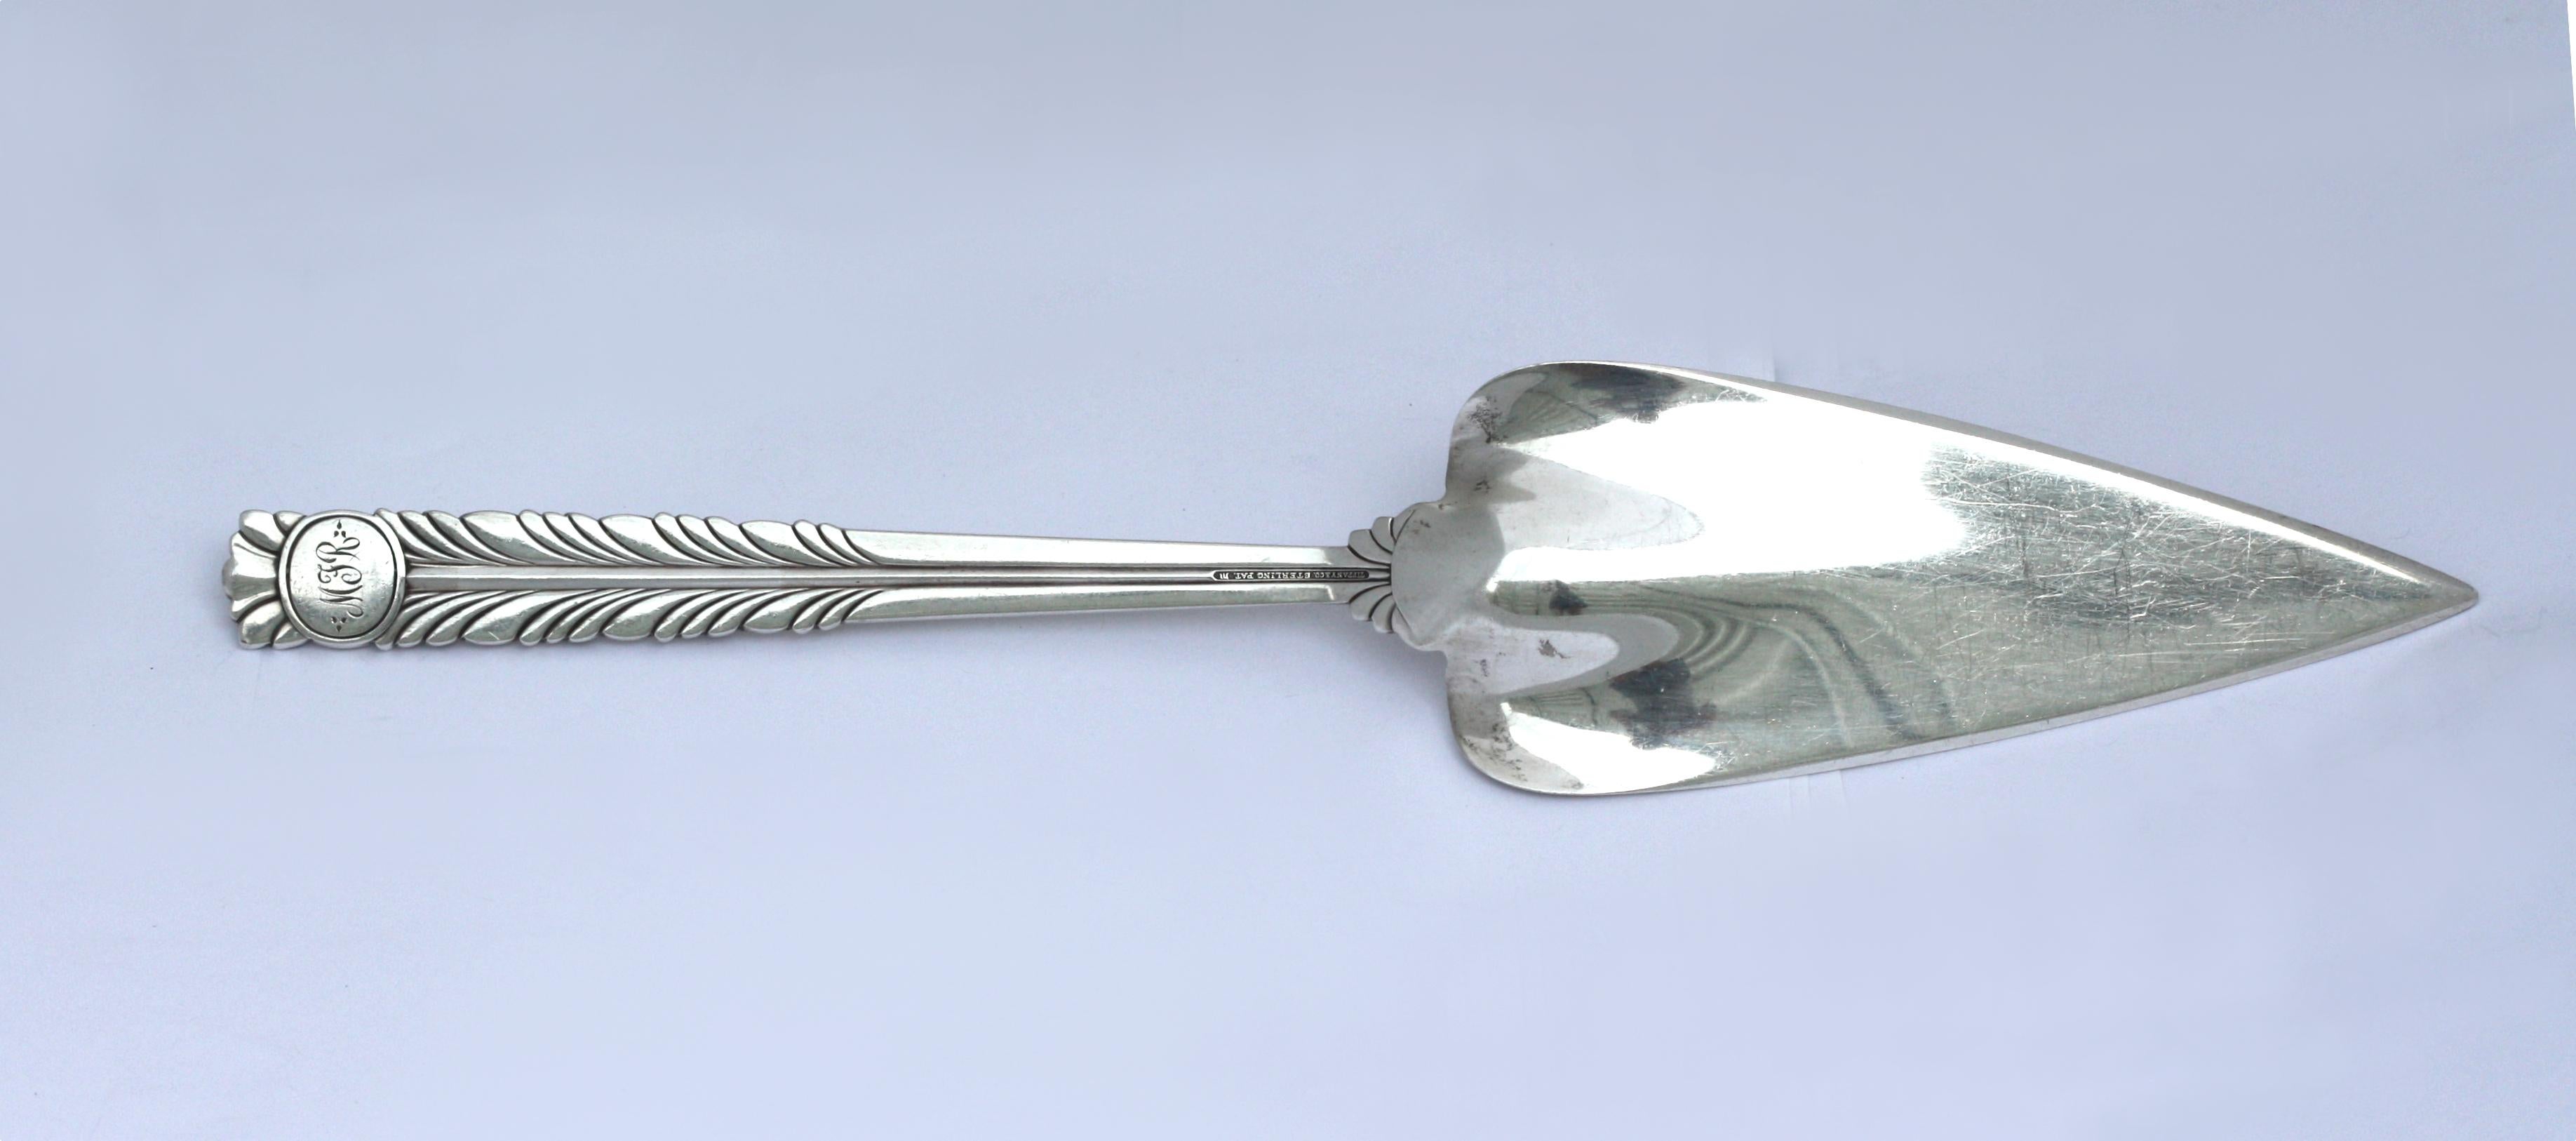 
Tiffany & Co. Sterling Silver Cake Server
Marked, Tiffany & Co, Sterling. In the Tomato / Exhibition pattern.
The handle cast with graduating stylized circular and bead motifs.
Length 11.75 in. (29.84 cm.), 5.3 ozt.